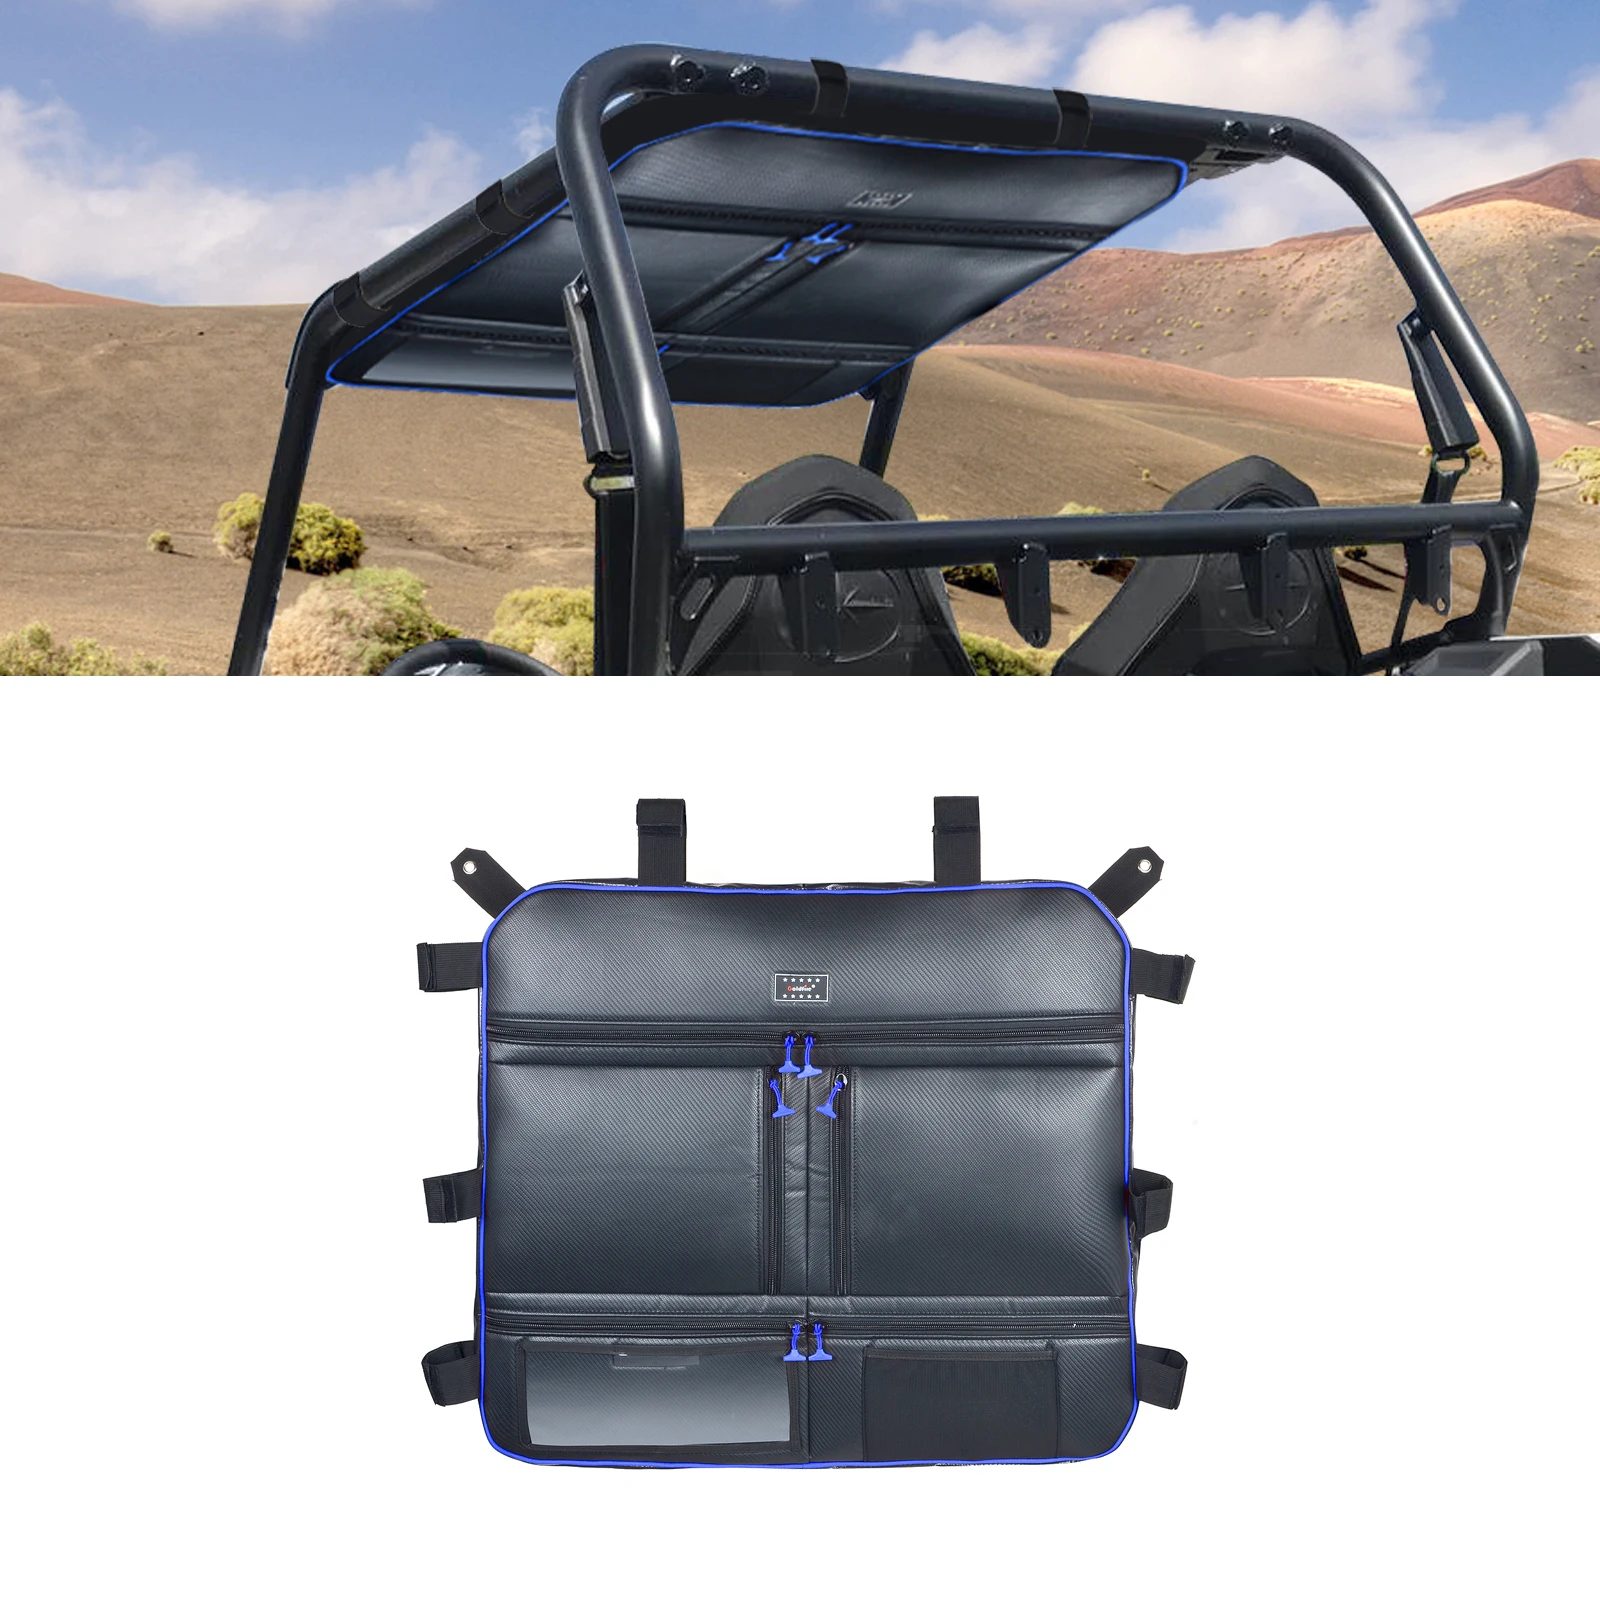 For Polaris RZR 1000 XP Accessories UTV Overhead Storage Bag Waterproof 1680D Organizers Map Bag For 2 Seat or 4 Seat Models